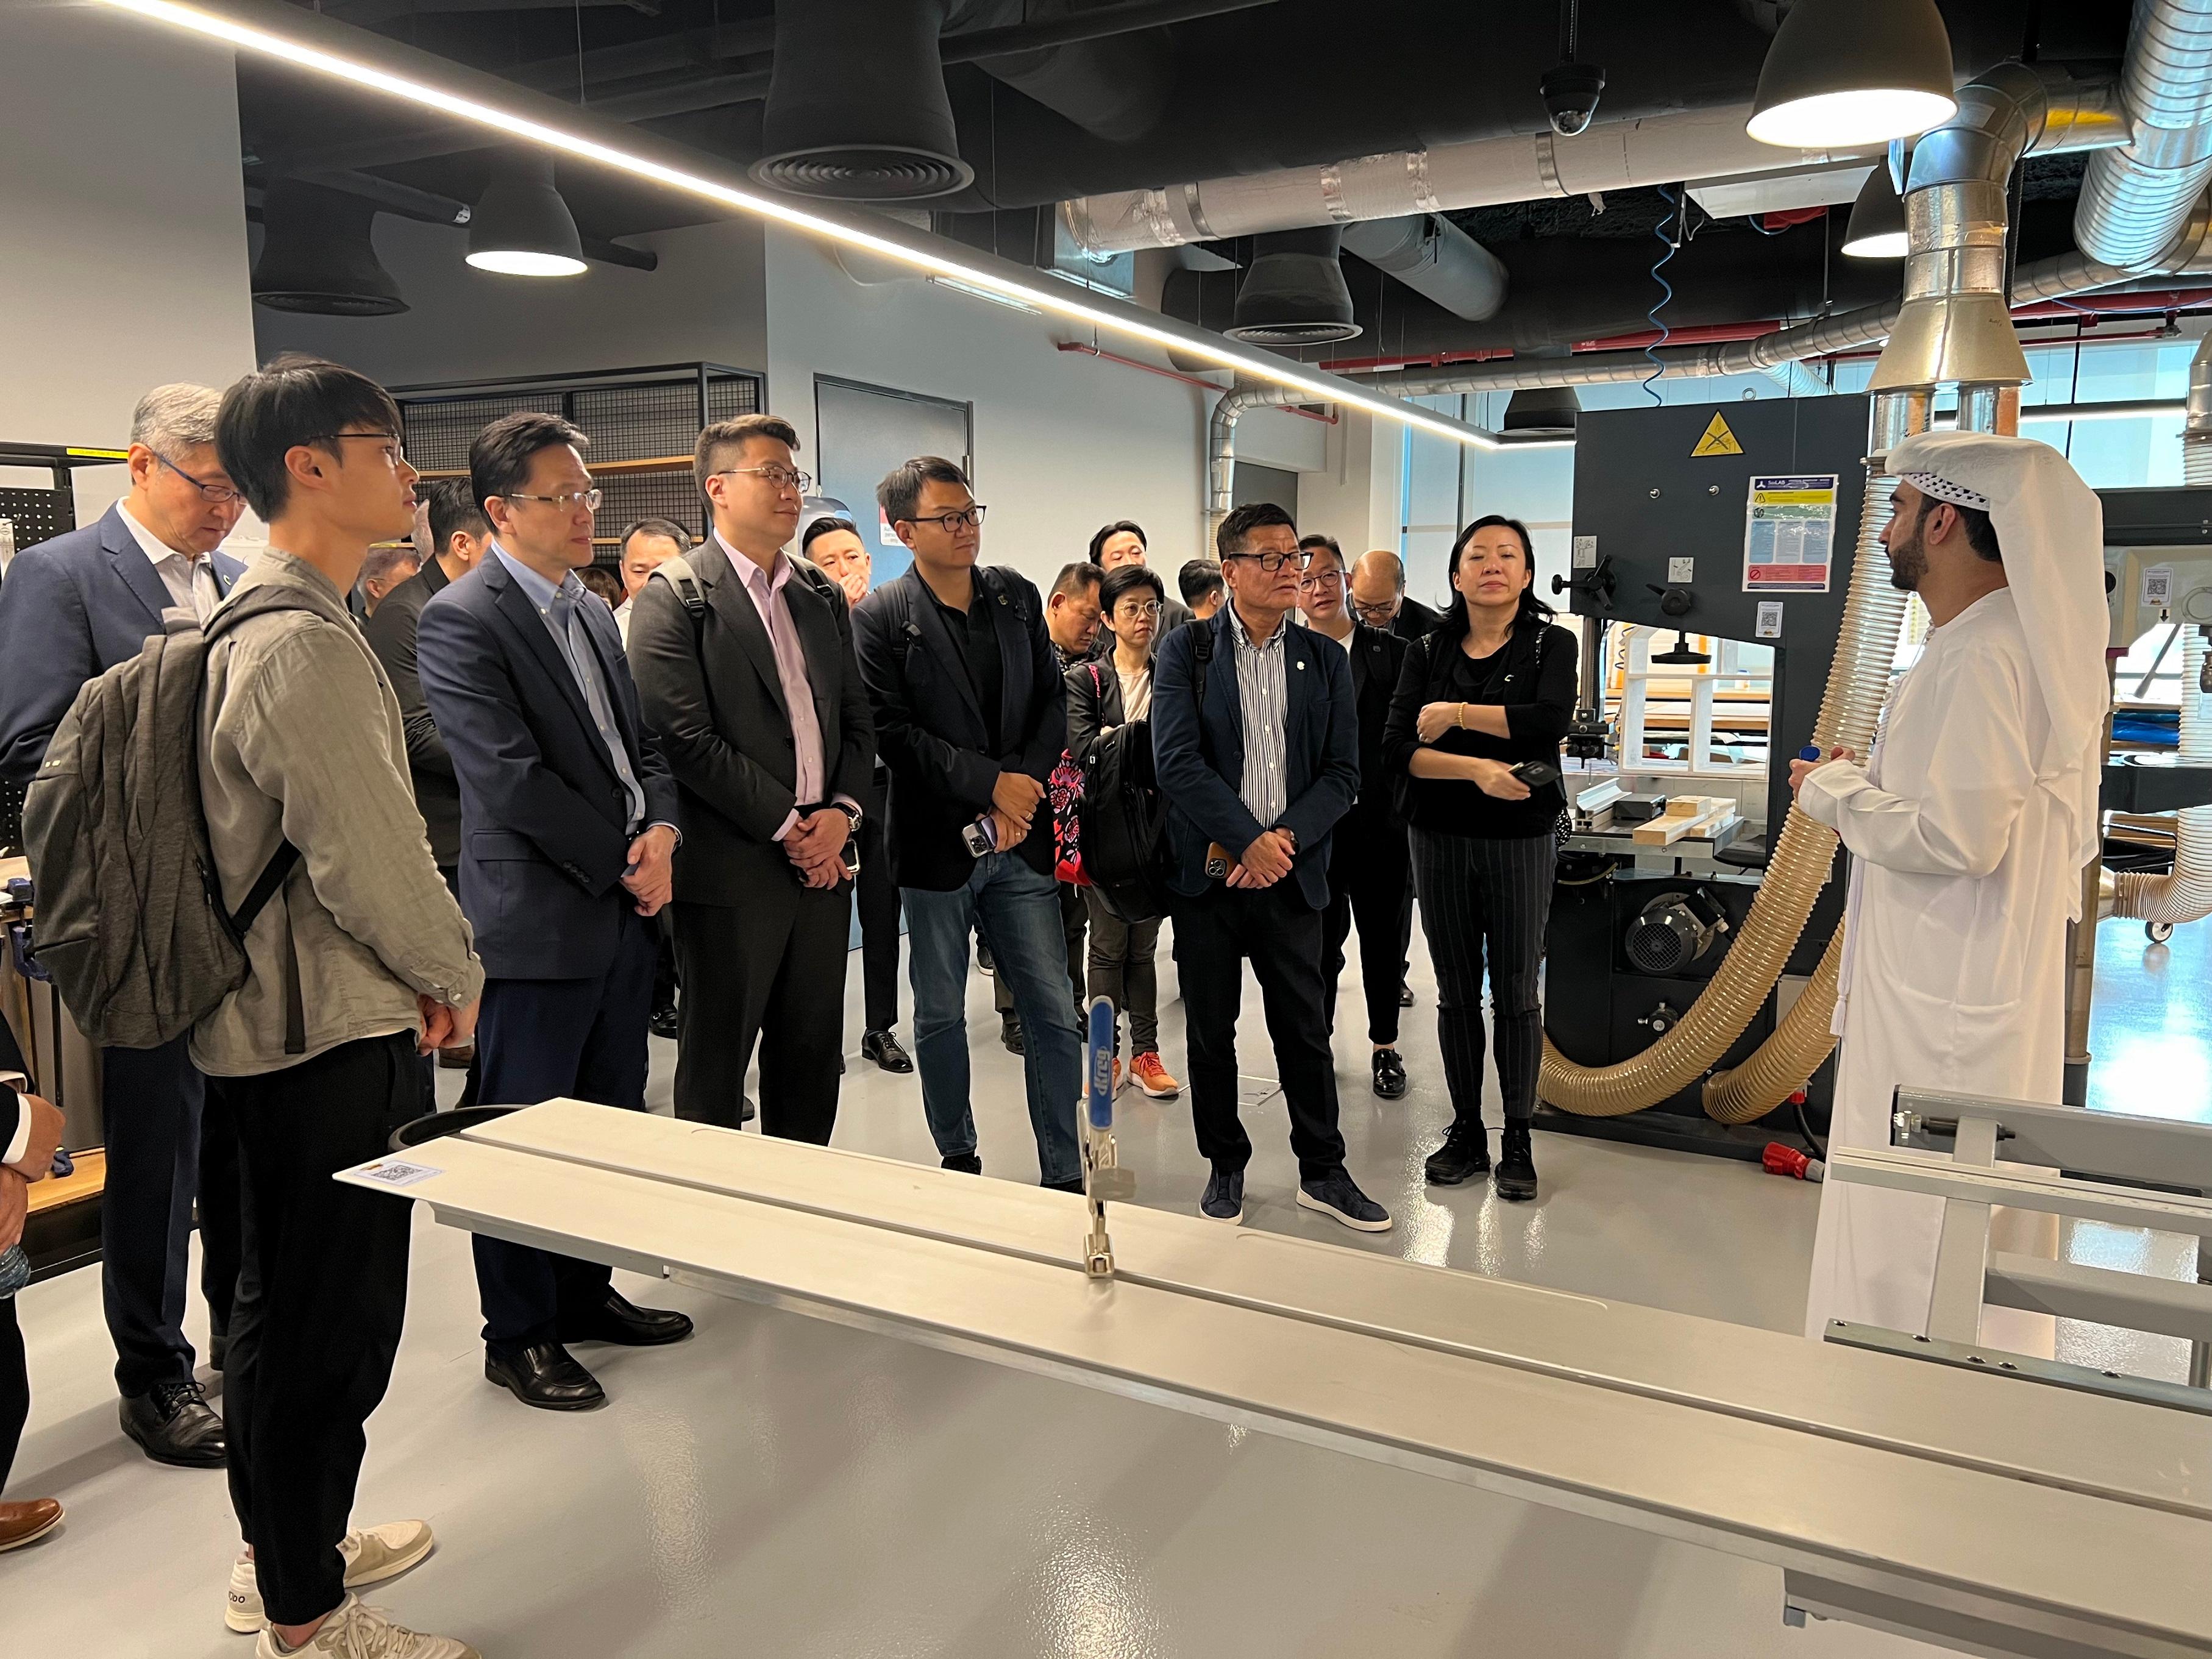 The Secretary for Innovation, Technology and Industry, Professor Sun Dong (front row, second left), visited the Sharjah Research Technology and Innovation Park on March 5 (Dubai time) and toured SOI Lab, the park's innovation laboratory.
